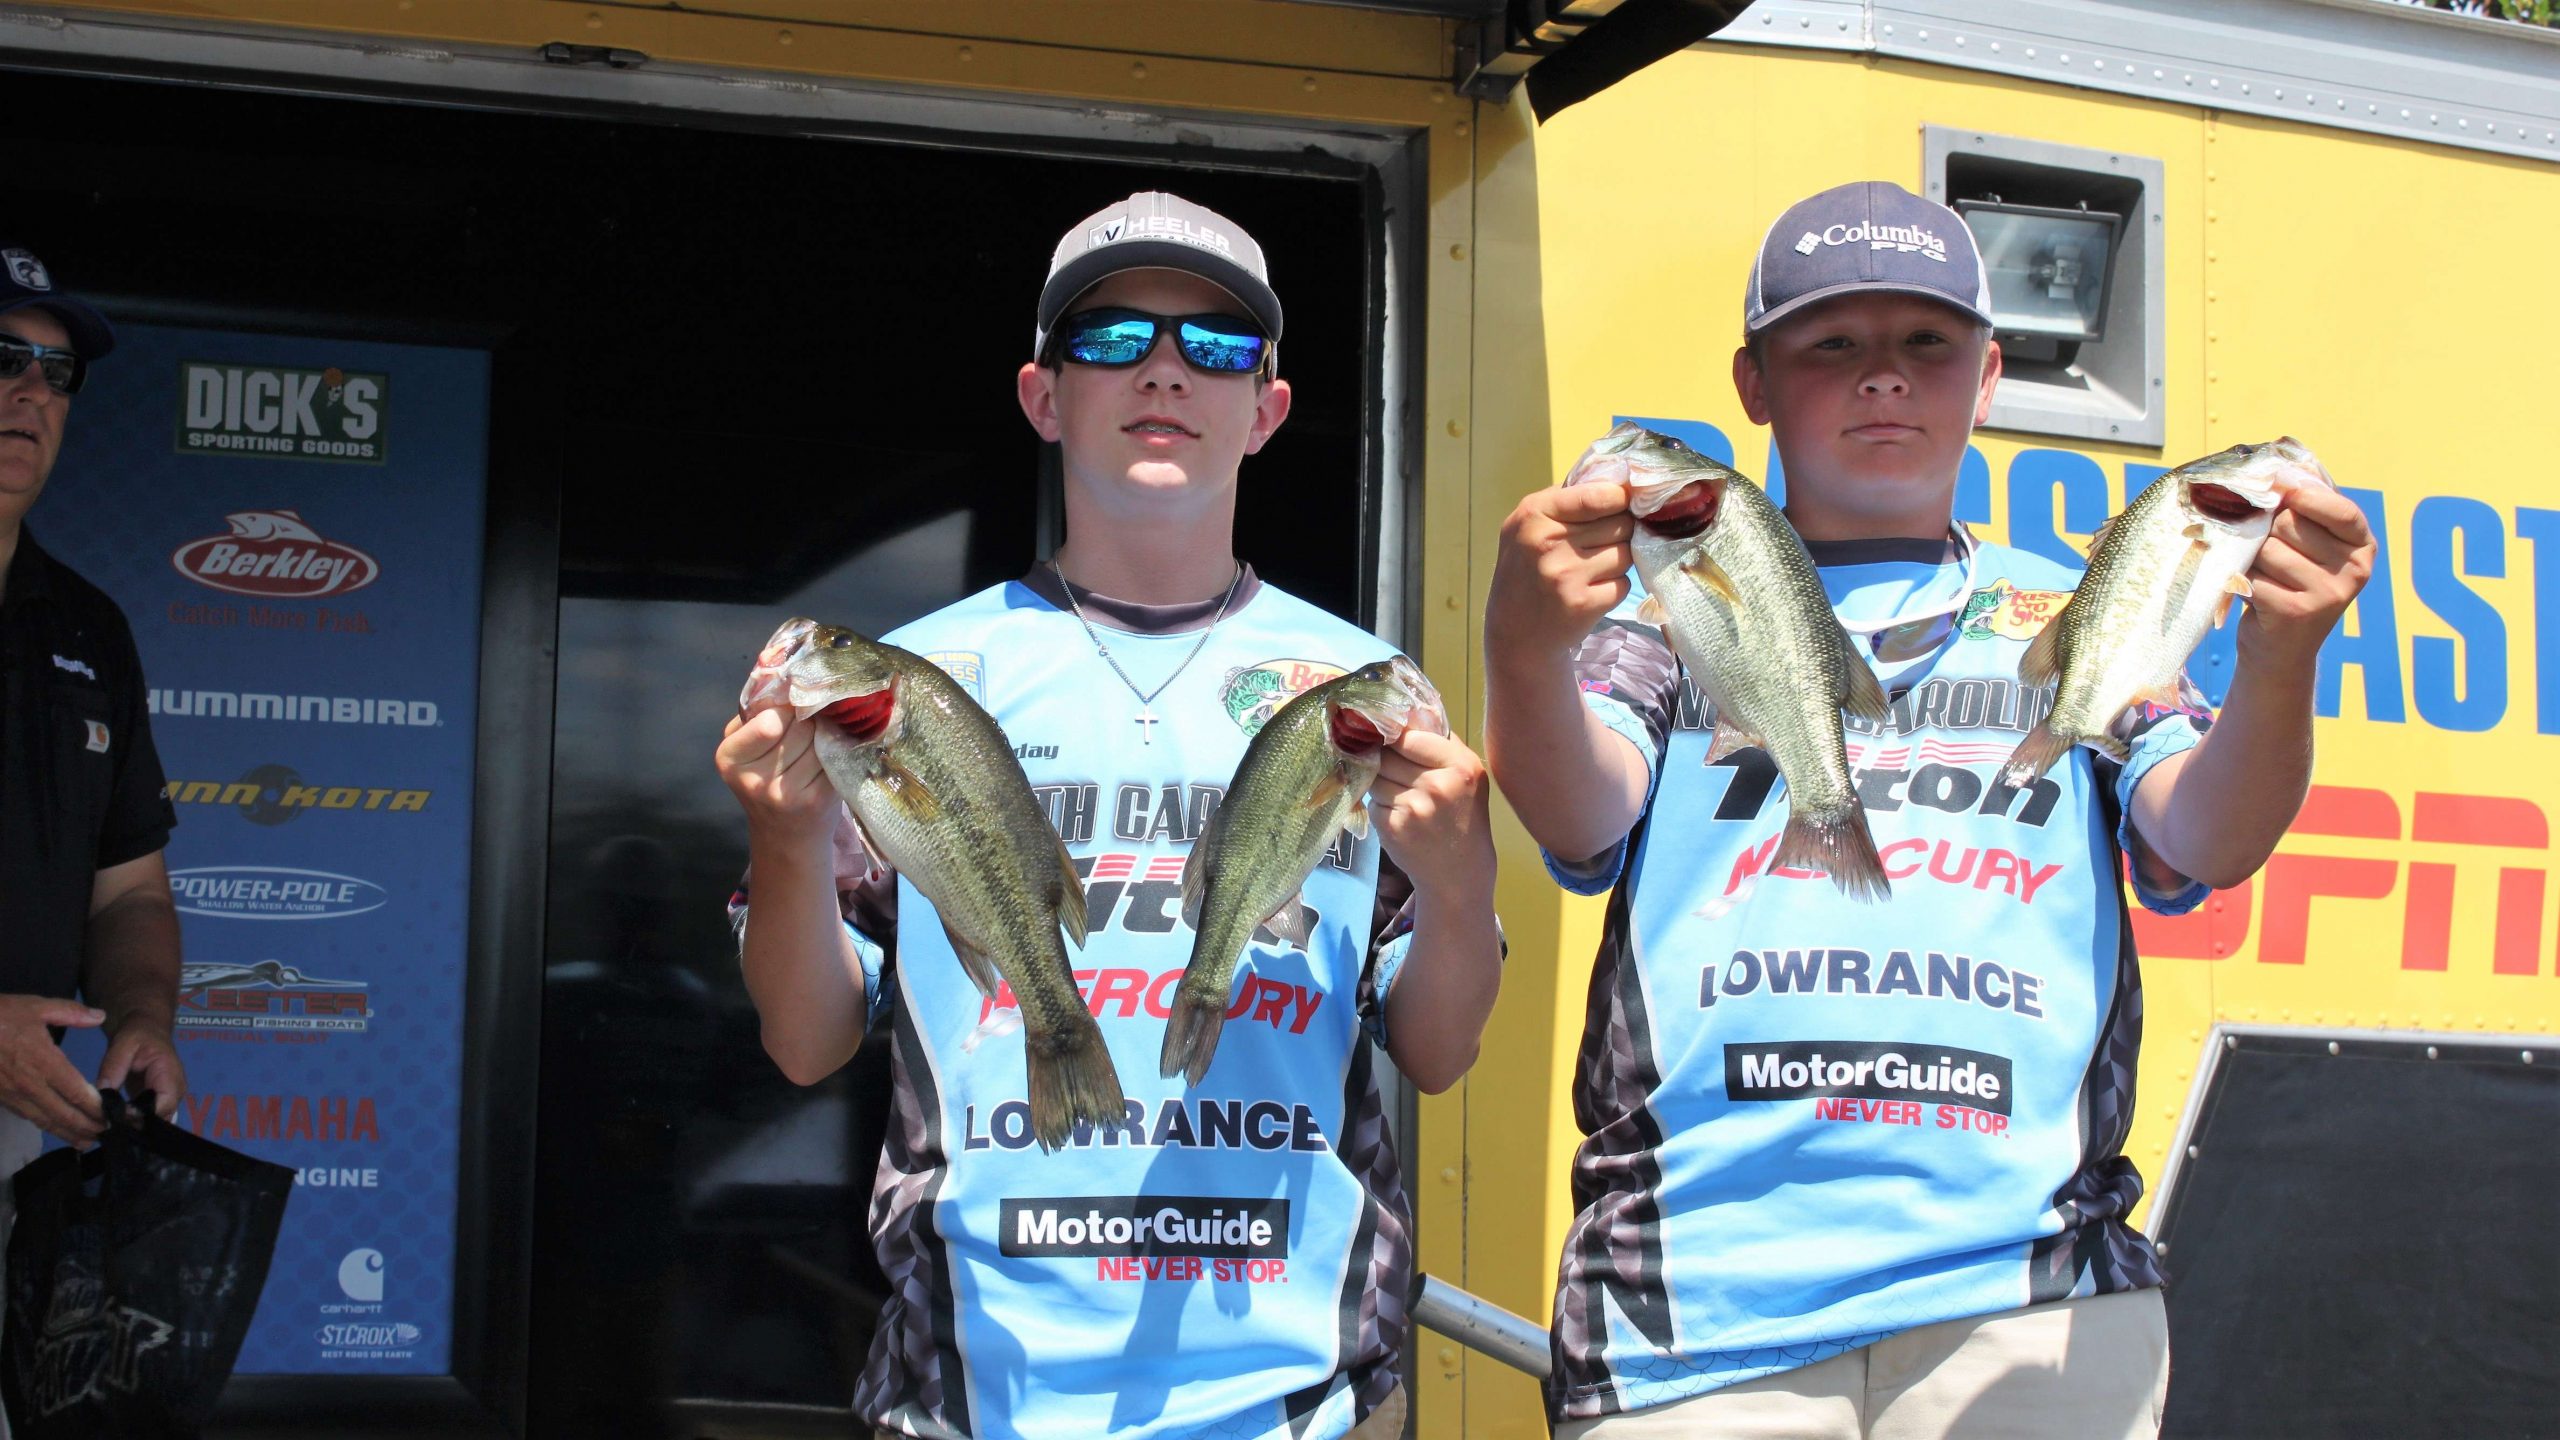  Nathan Canaday and Kyle Davis of North Carolina are in 18th place with 6-3.